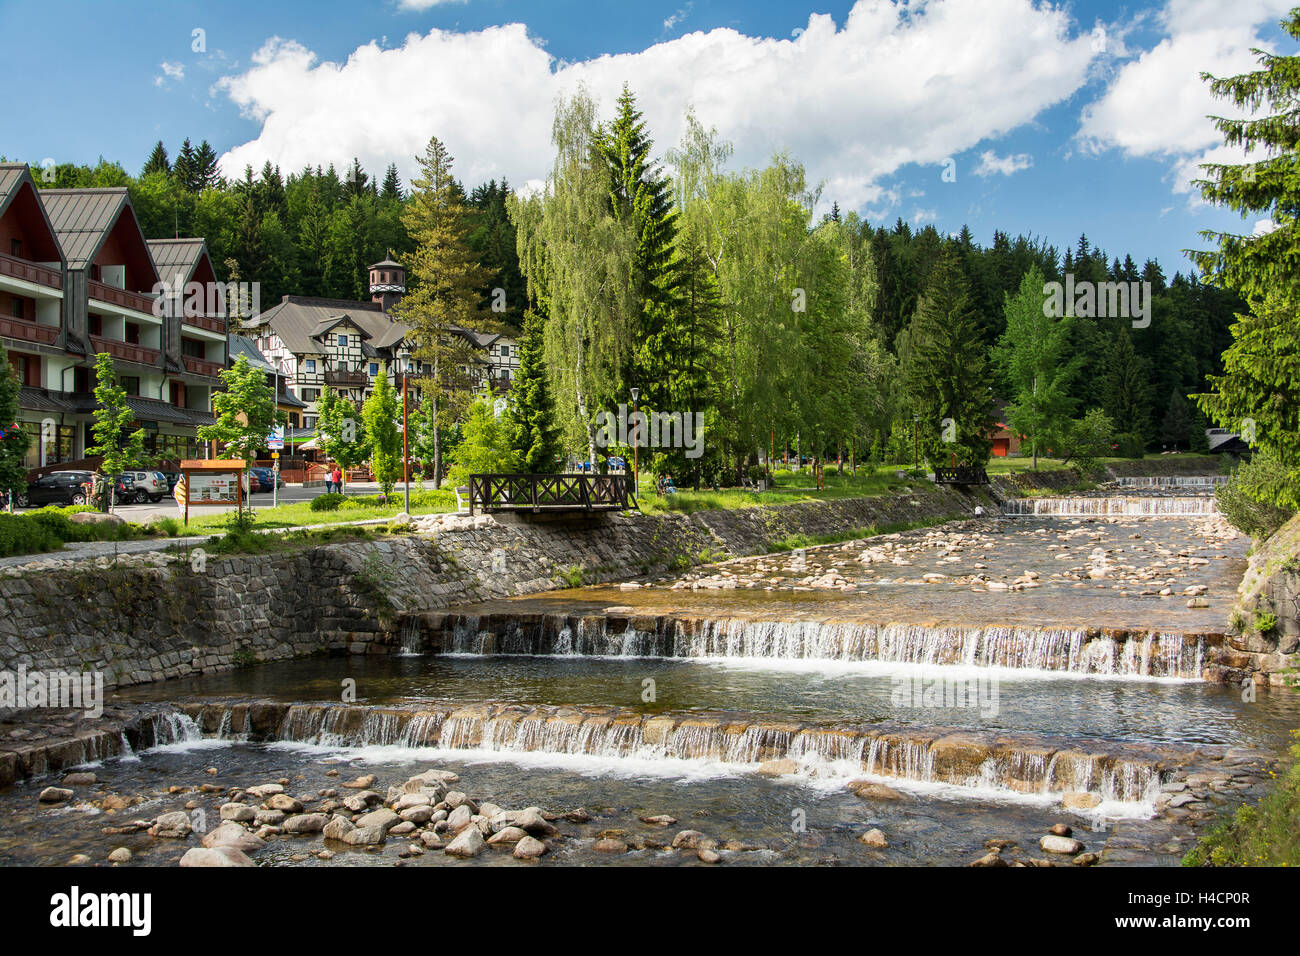 Wooden spindle maker's mill, rapids the rennets Stock Photo